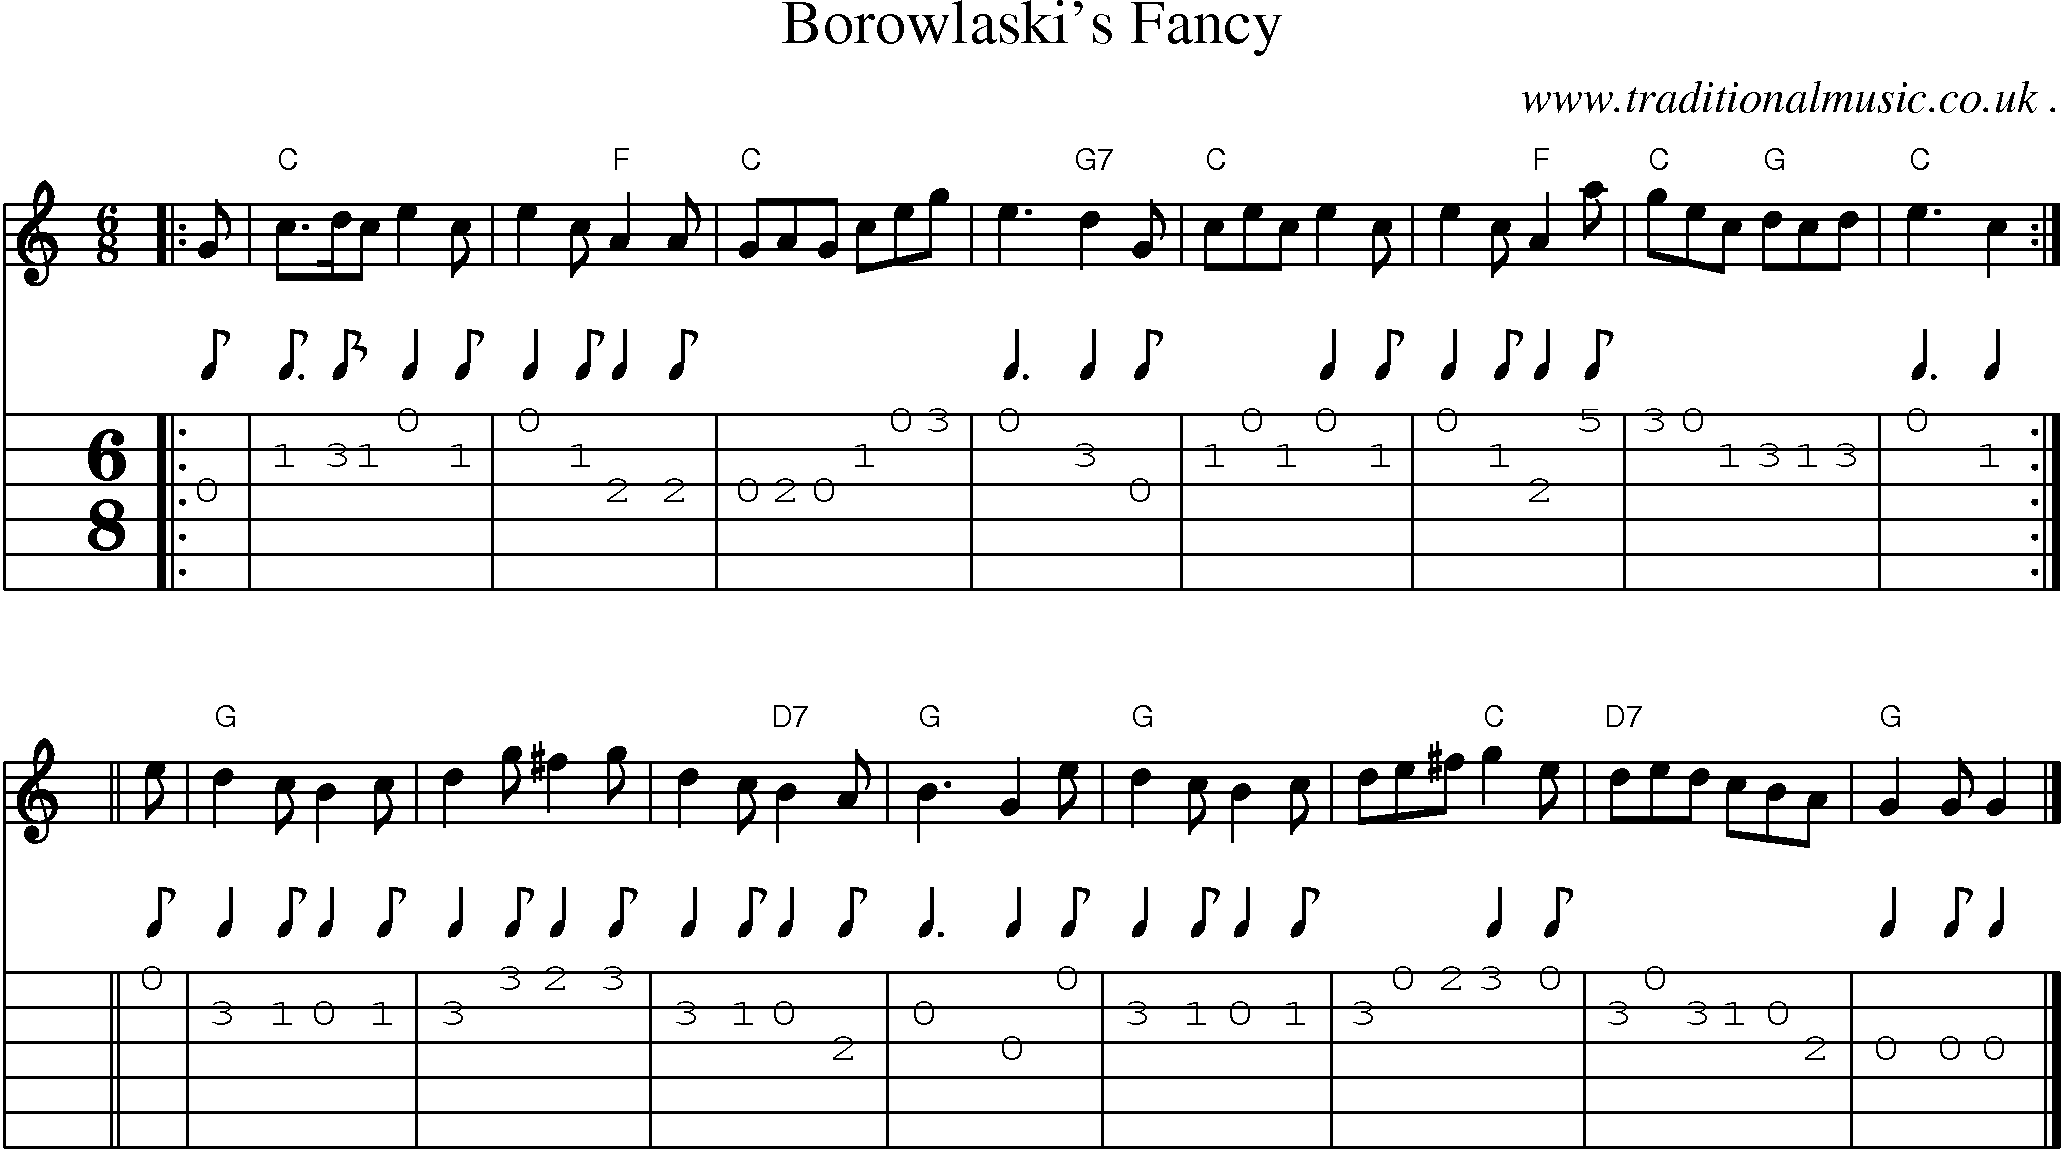 Sheet-music  score, Chords and Guitar Tabs for Borowlaskis Fancy